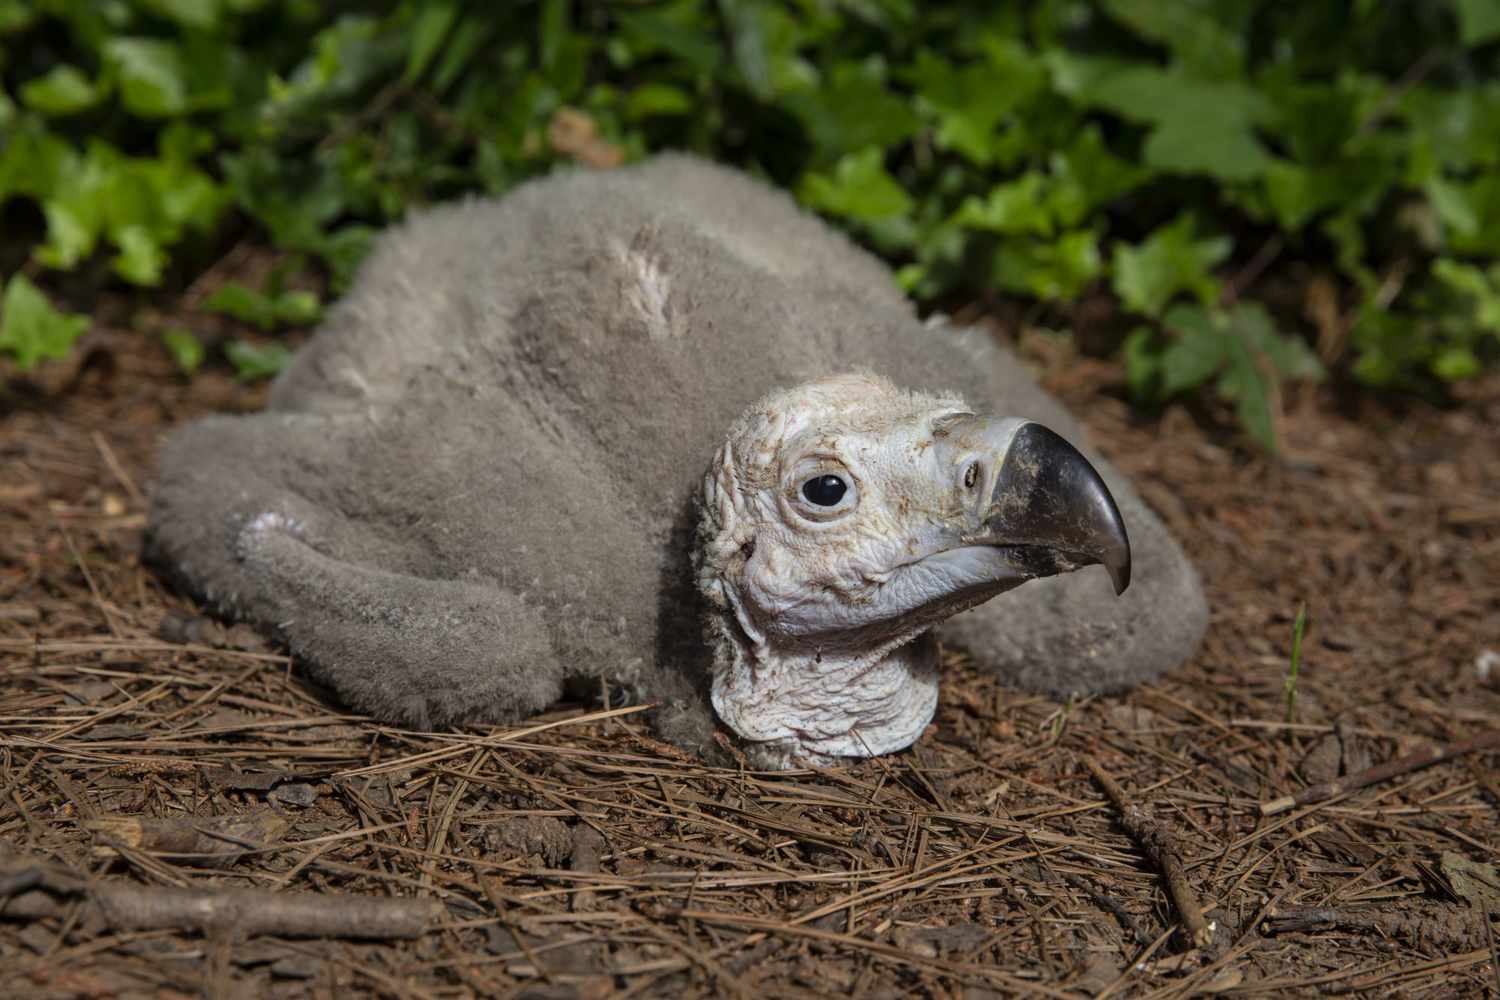 ZOO ATLANTA ANNOUNCES ITS FIRST-EVER HATCHING OF A LAPPET-FACED VULTURE CHICK